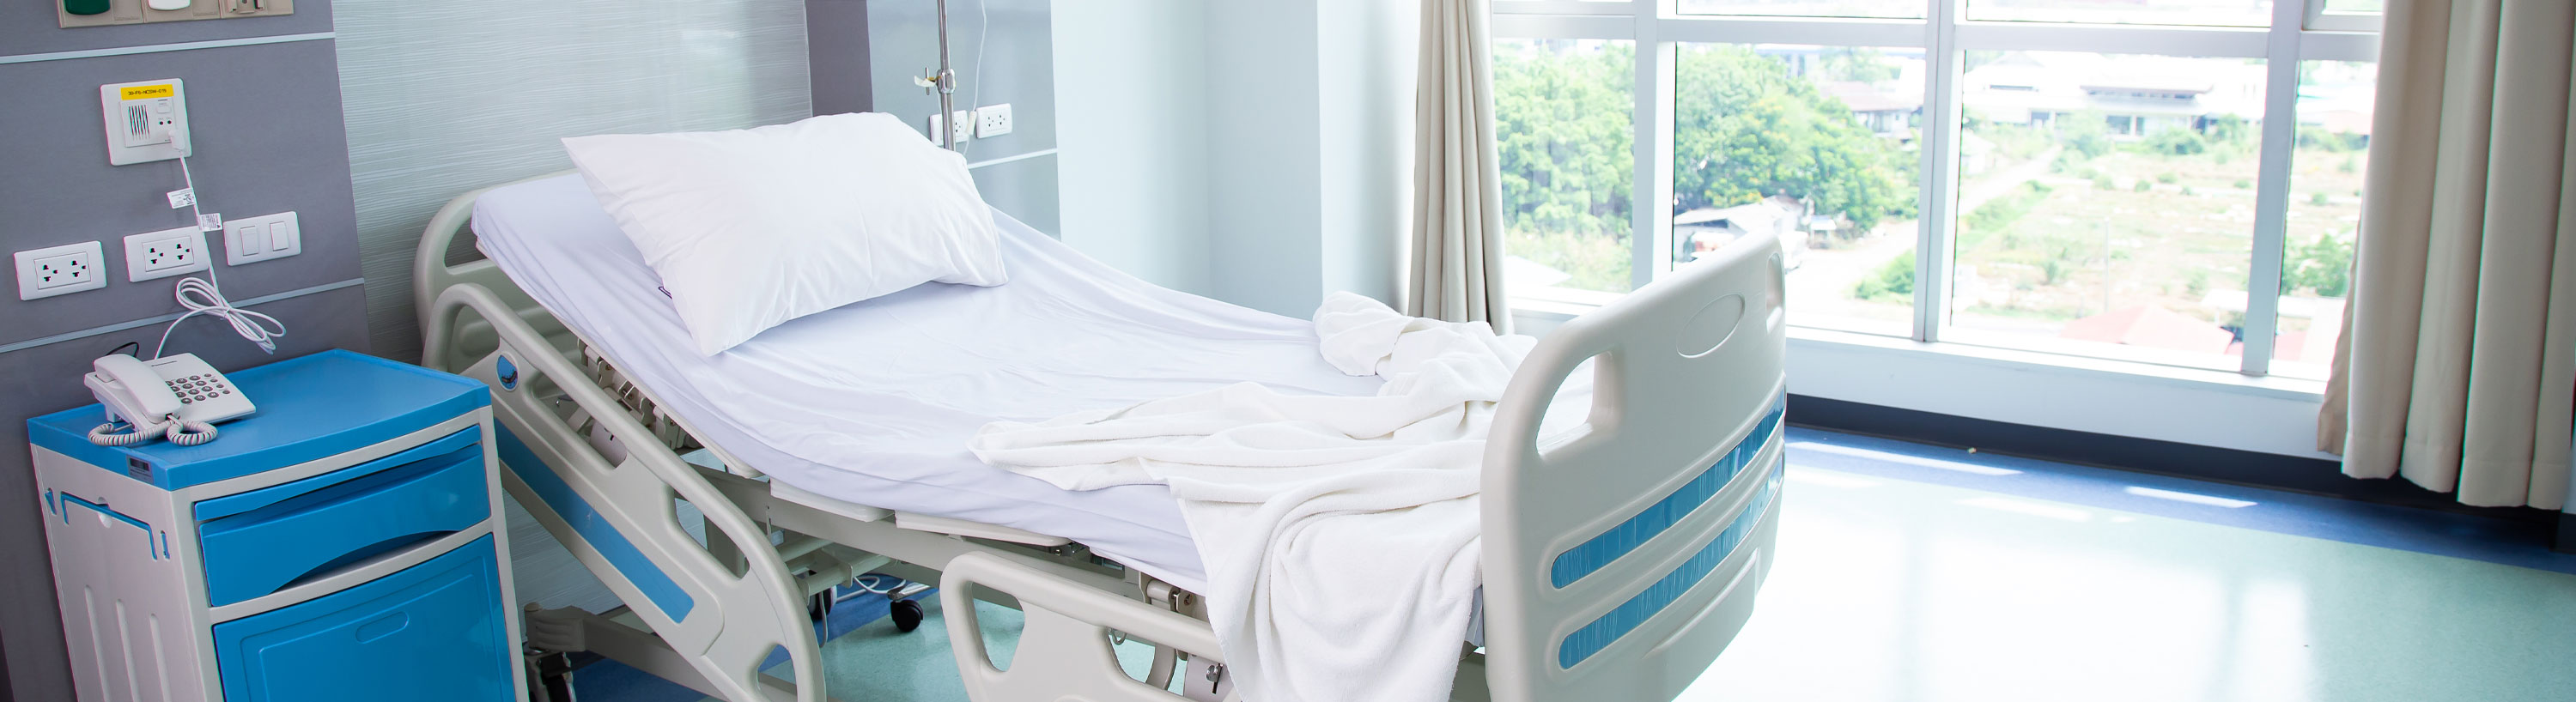 Banner picture of a Hospital Room that has a swing bed in it.